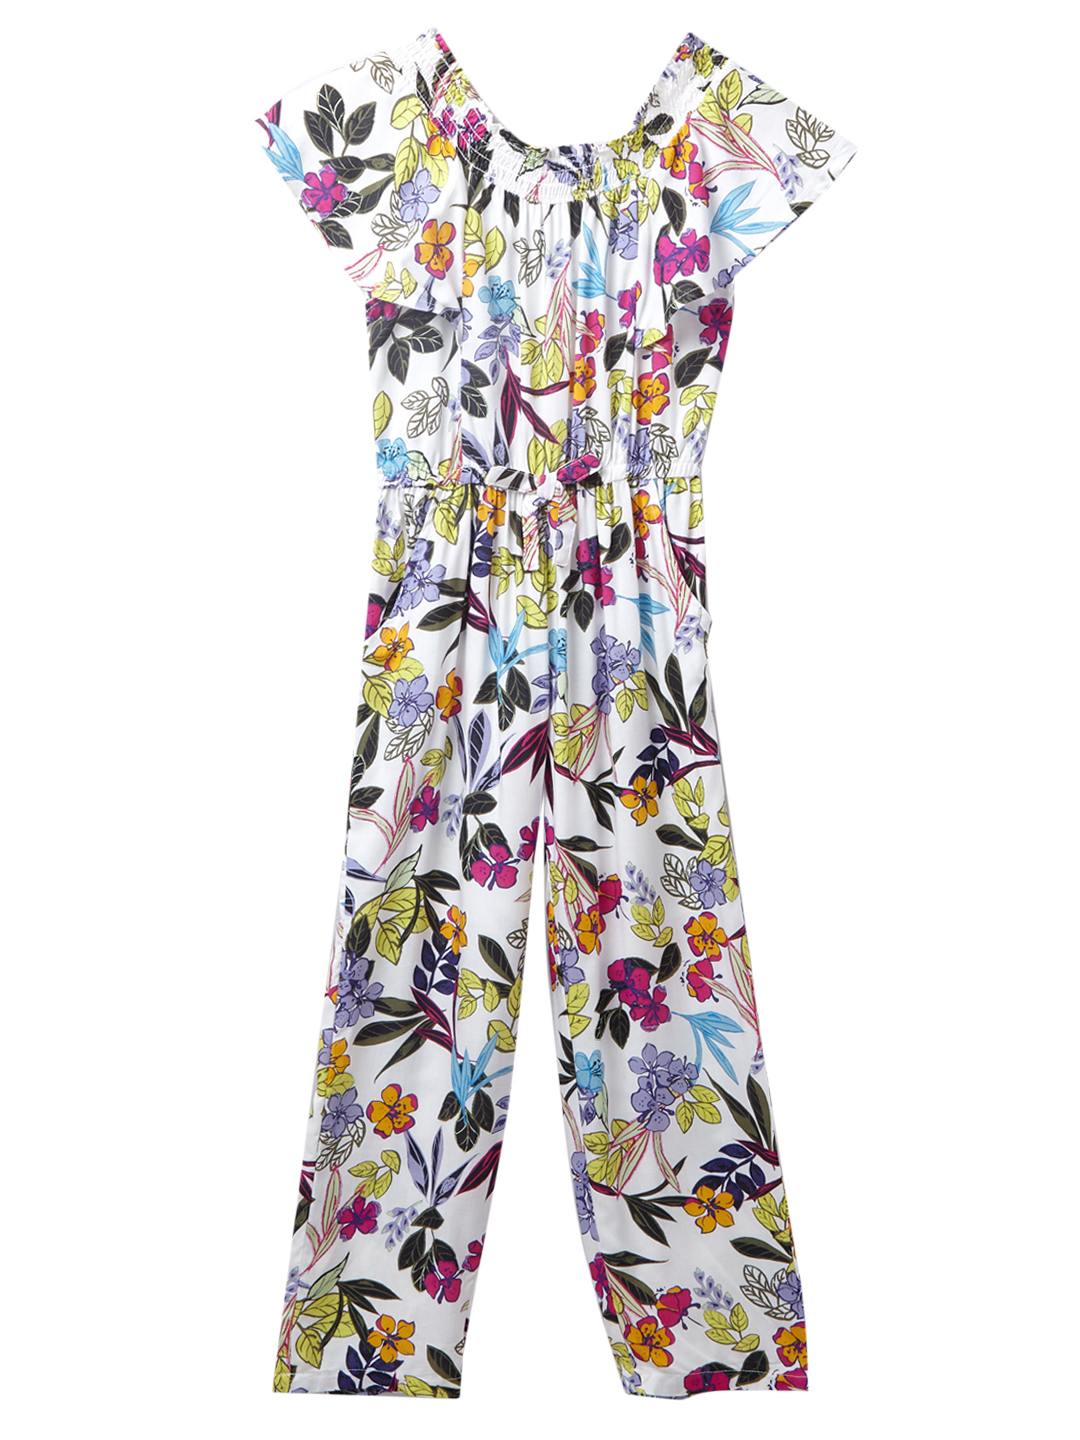 Buy jumpsuit for teens Online at Affordable Prices in India